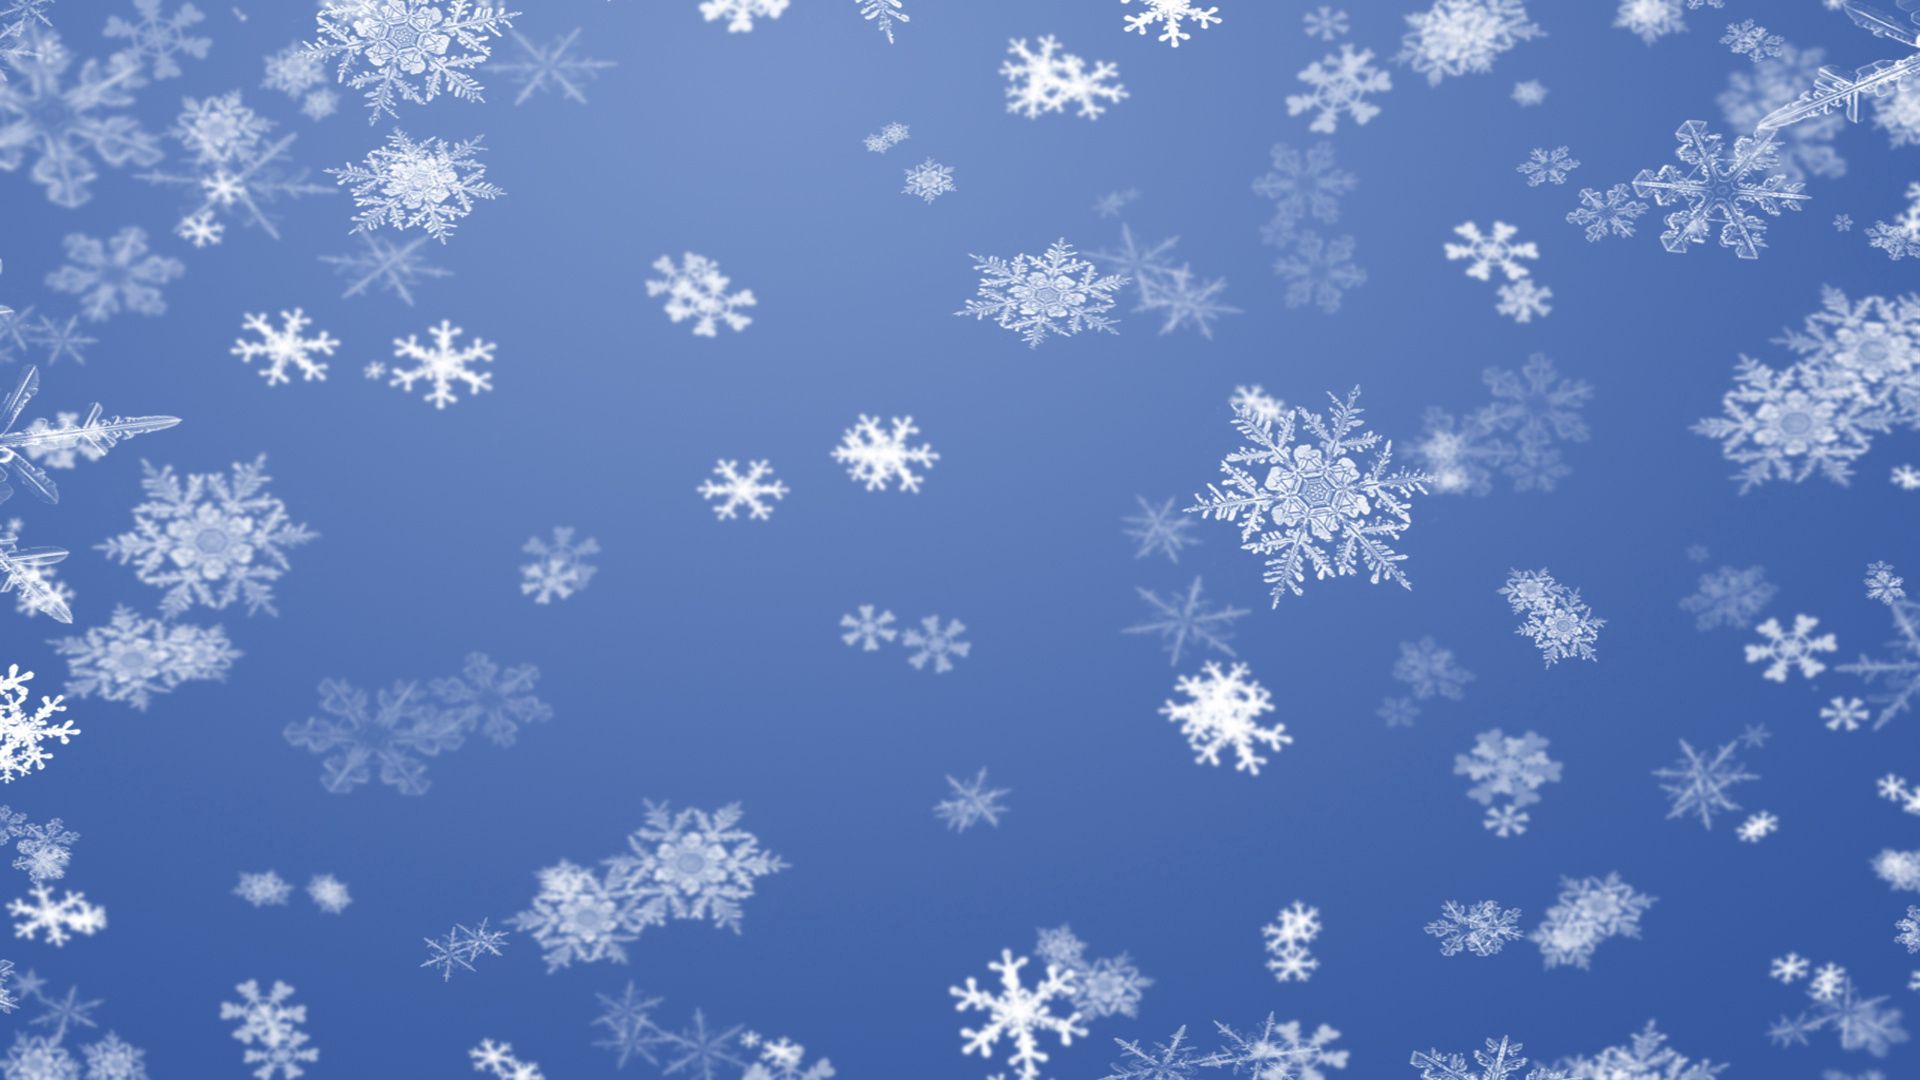 61399 Screensavers and Wallpapers Snowflakes for phone. Download winter, background, snowflakes, patterns, texture, textures pictures for free